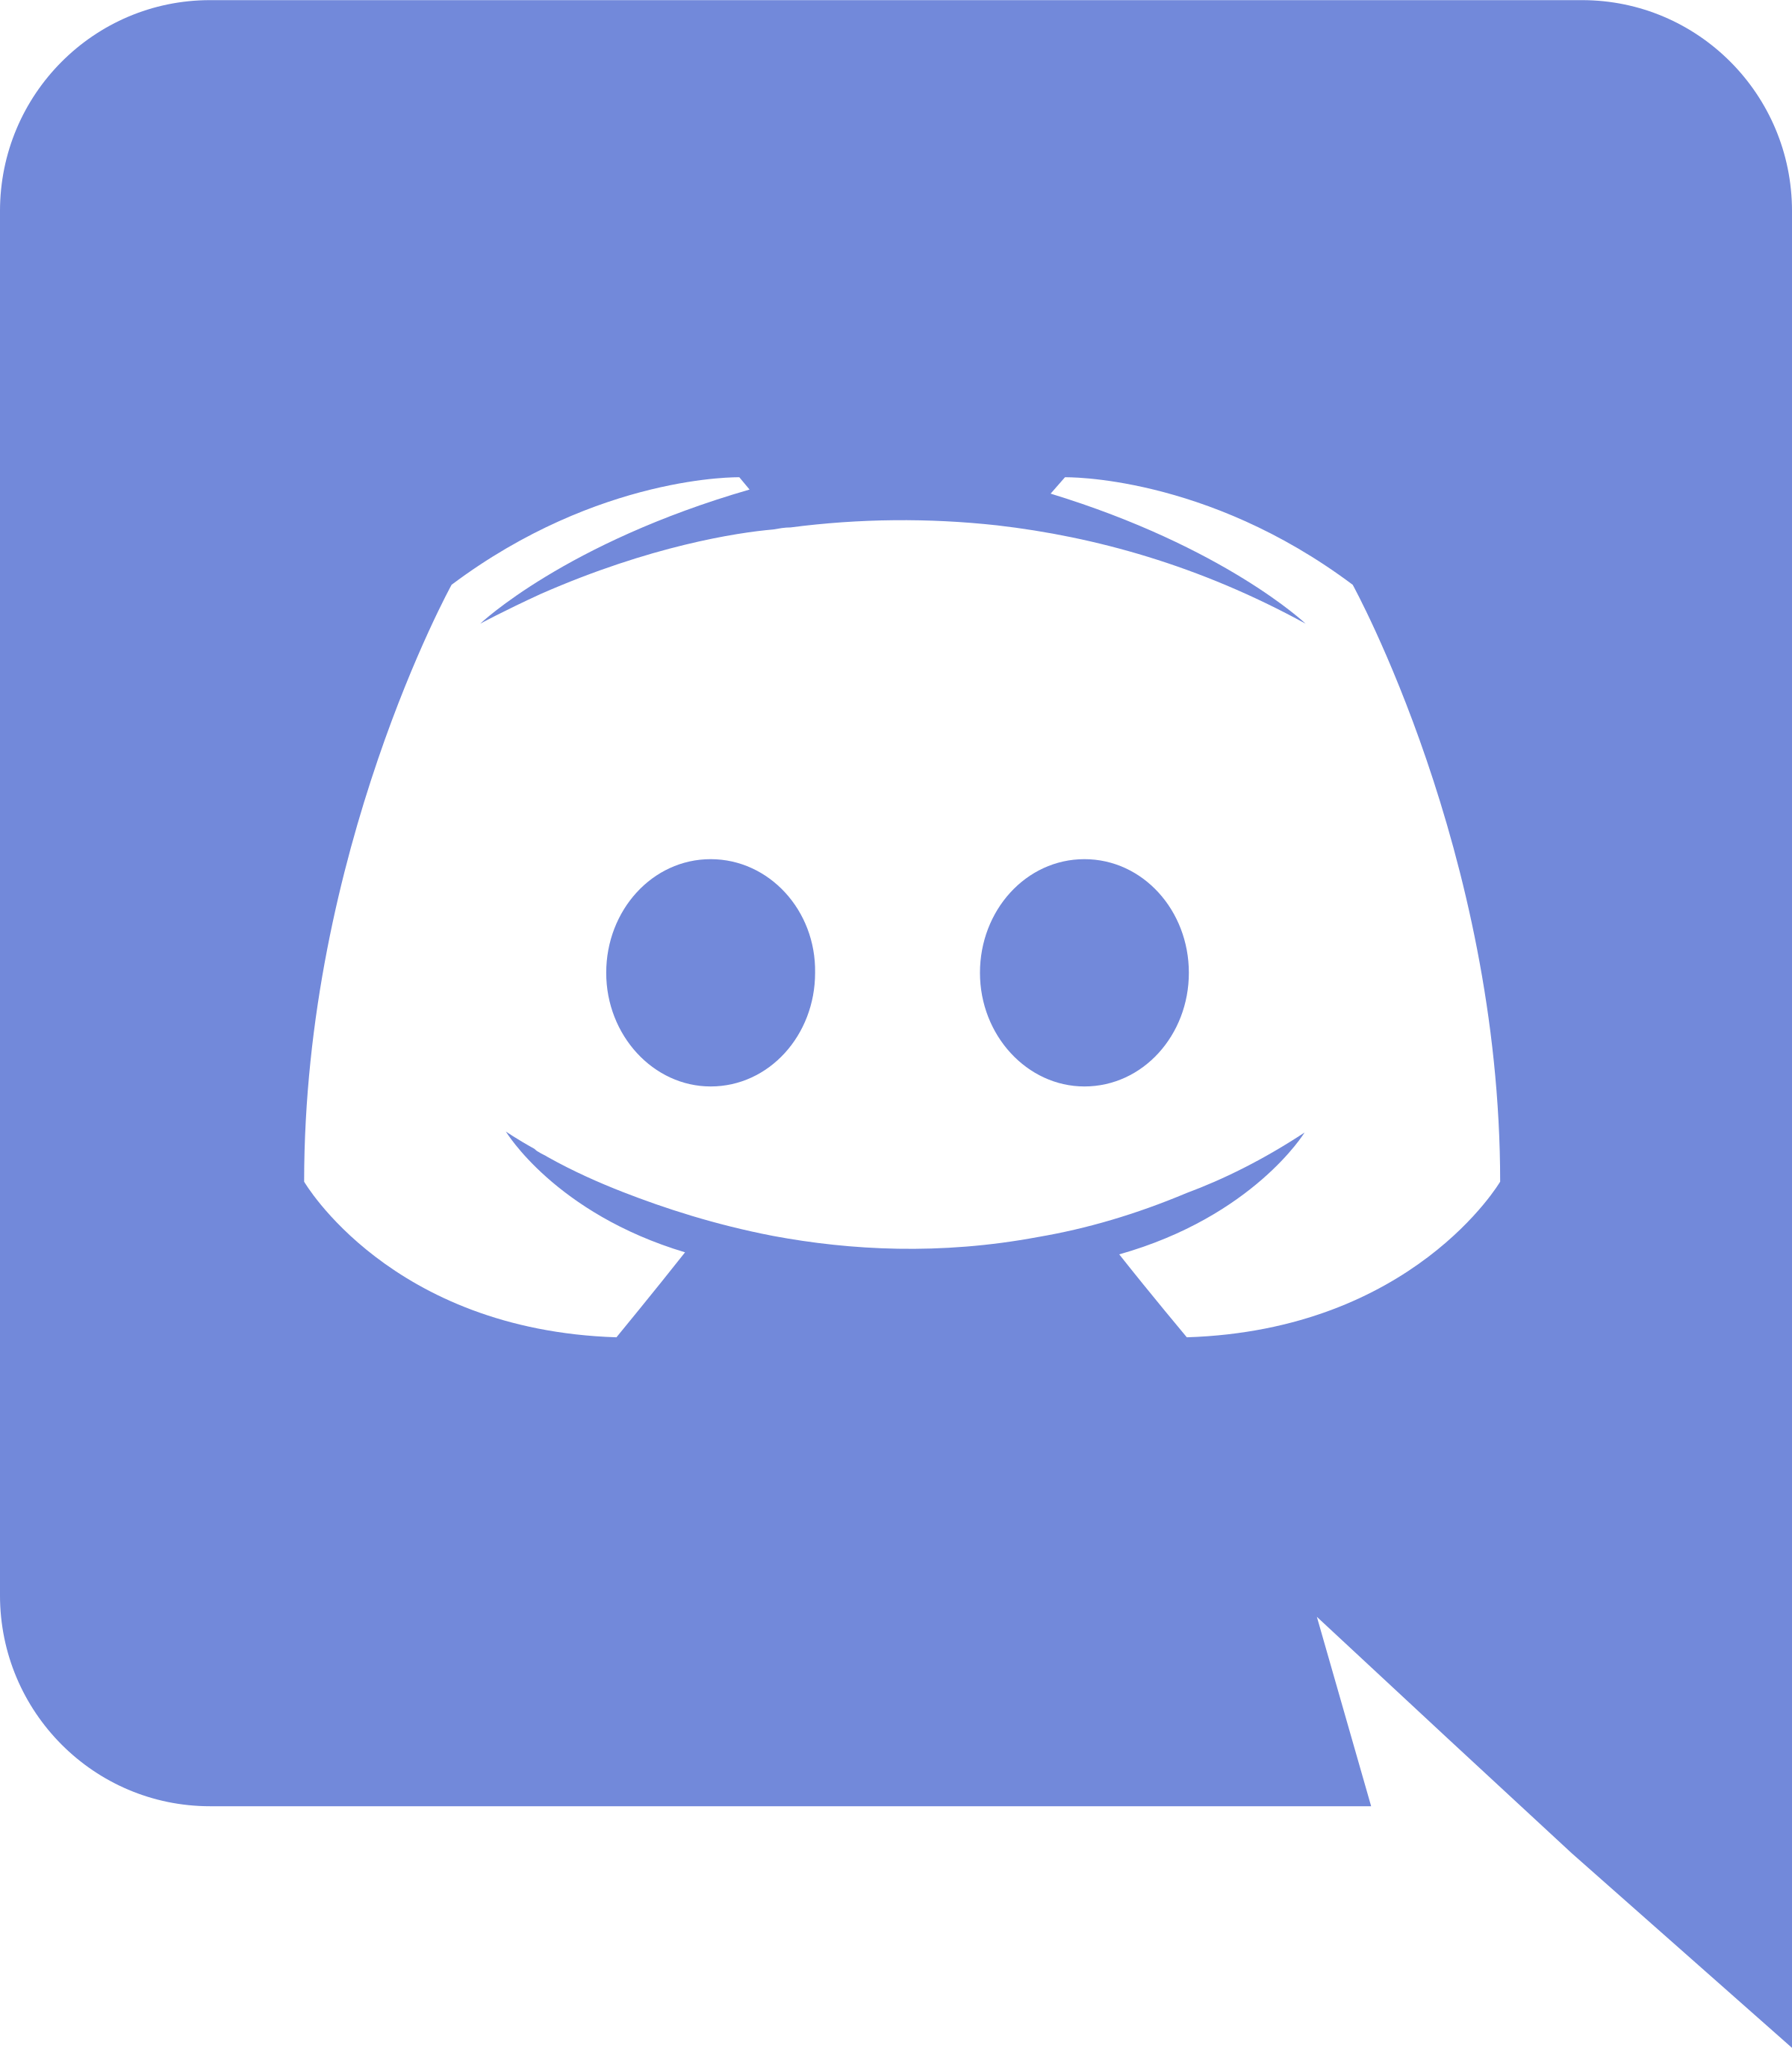 the Discord logo, which is a speech bubble with a little alien in the middle